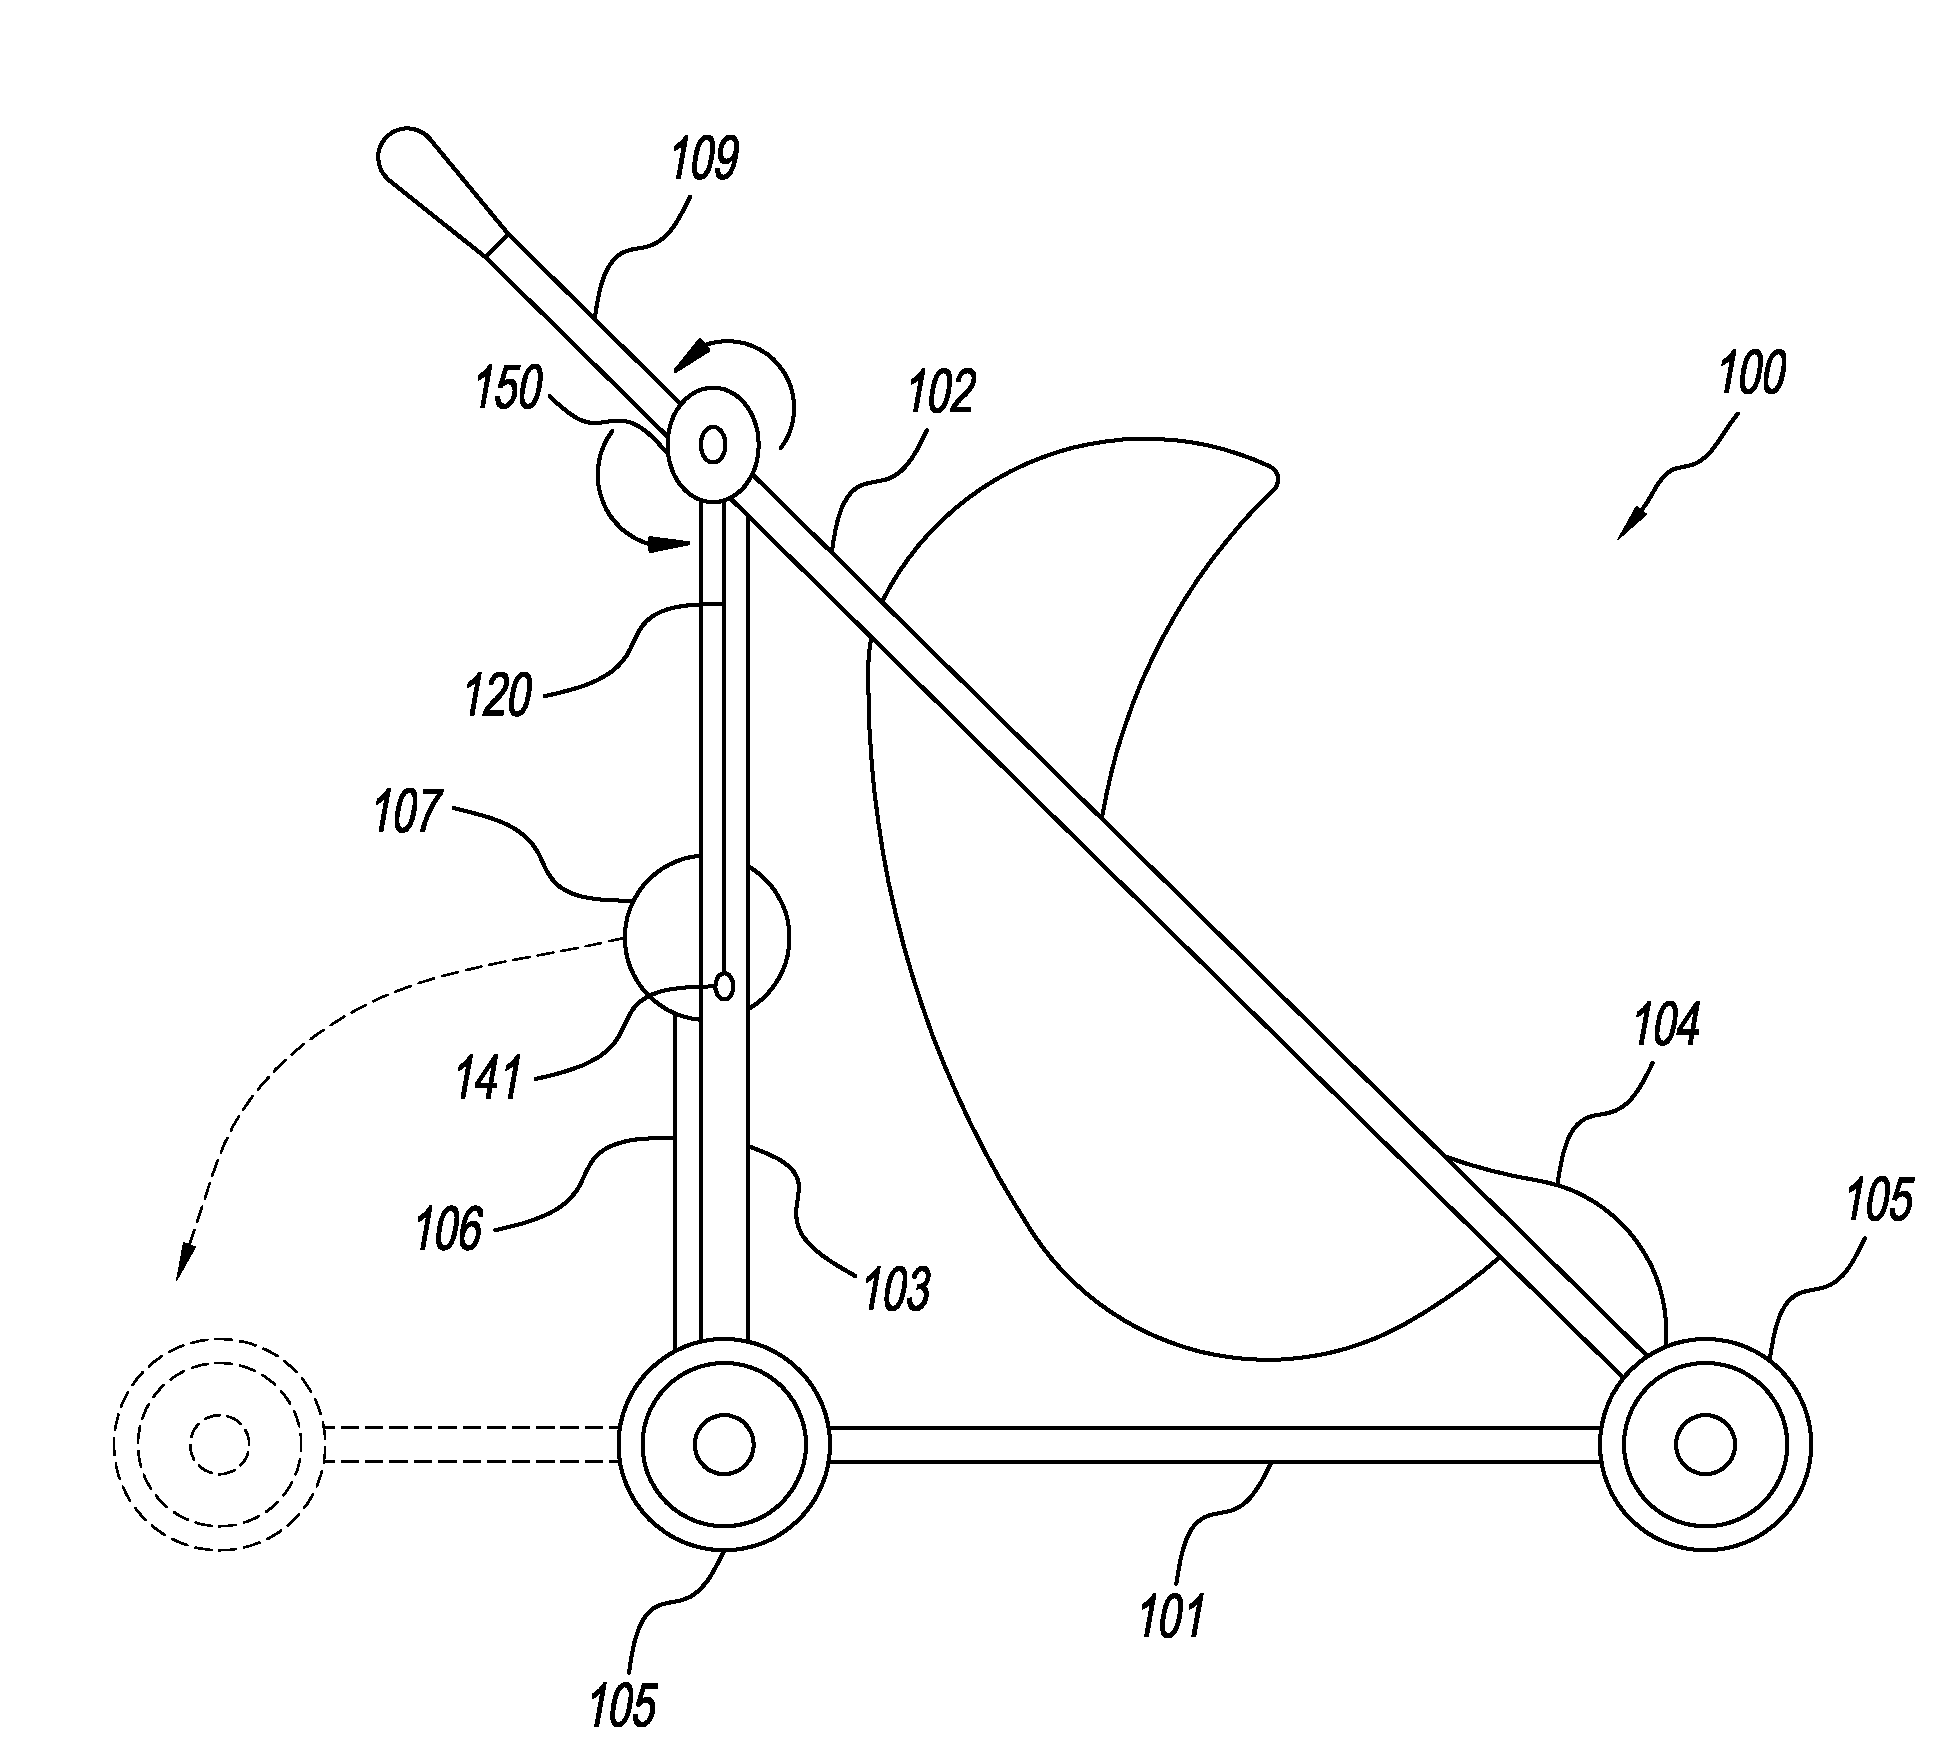 Stroller with telescopic and locking members